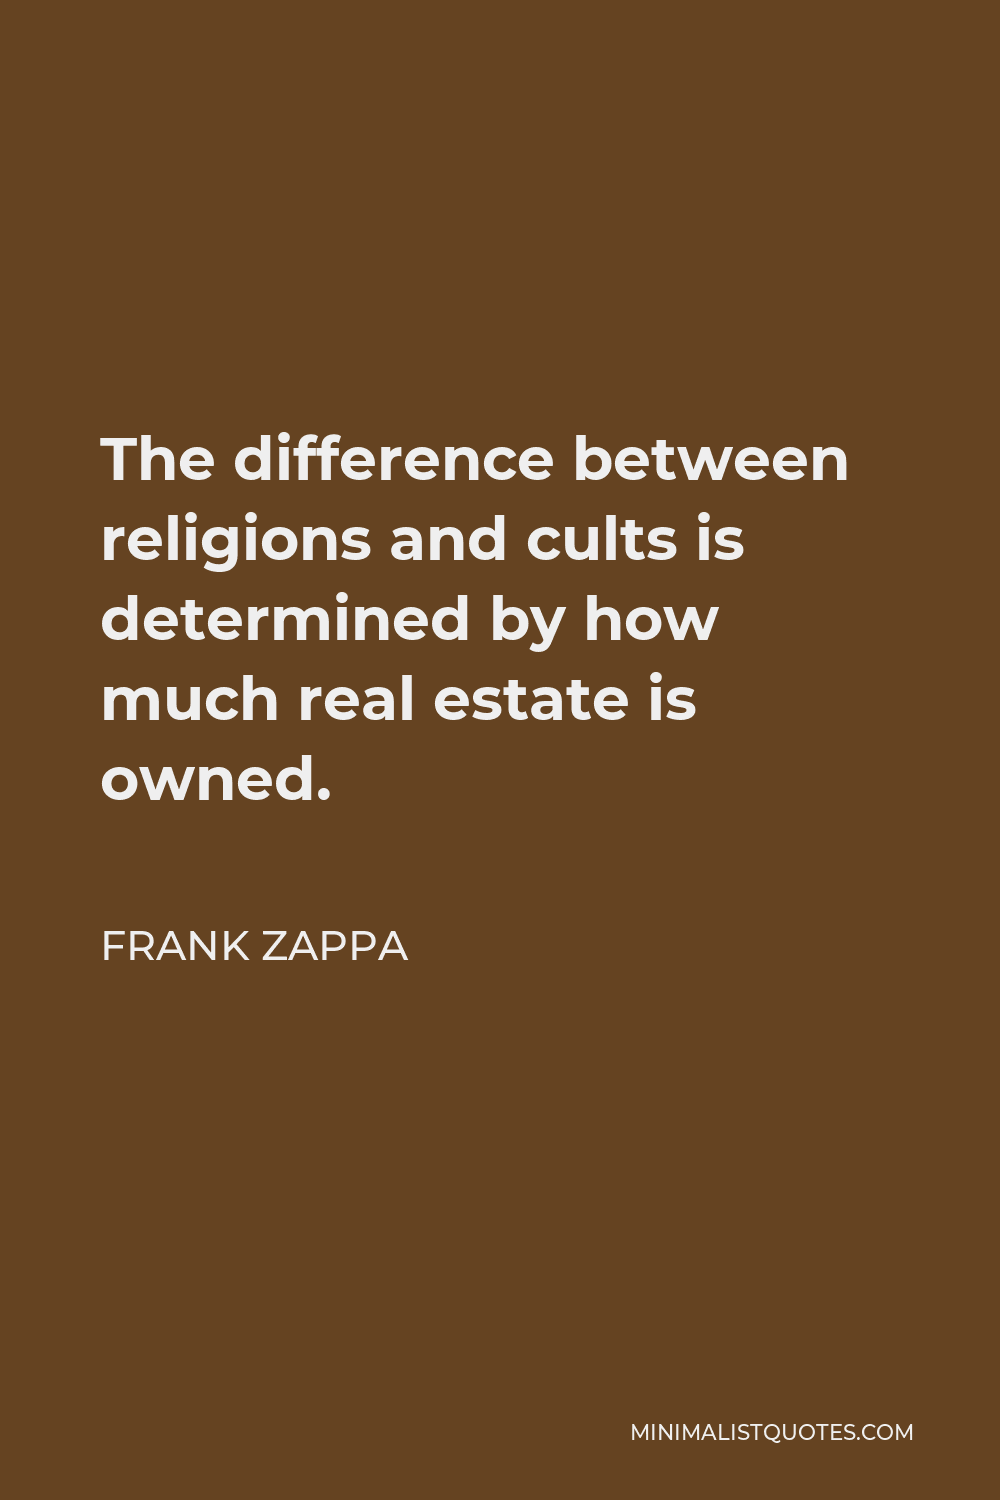 Frank Zappa Quote - The difference between religions and cults is determined by how much real estate is owned.